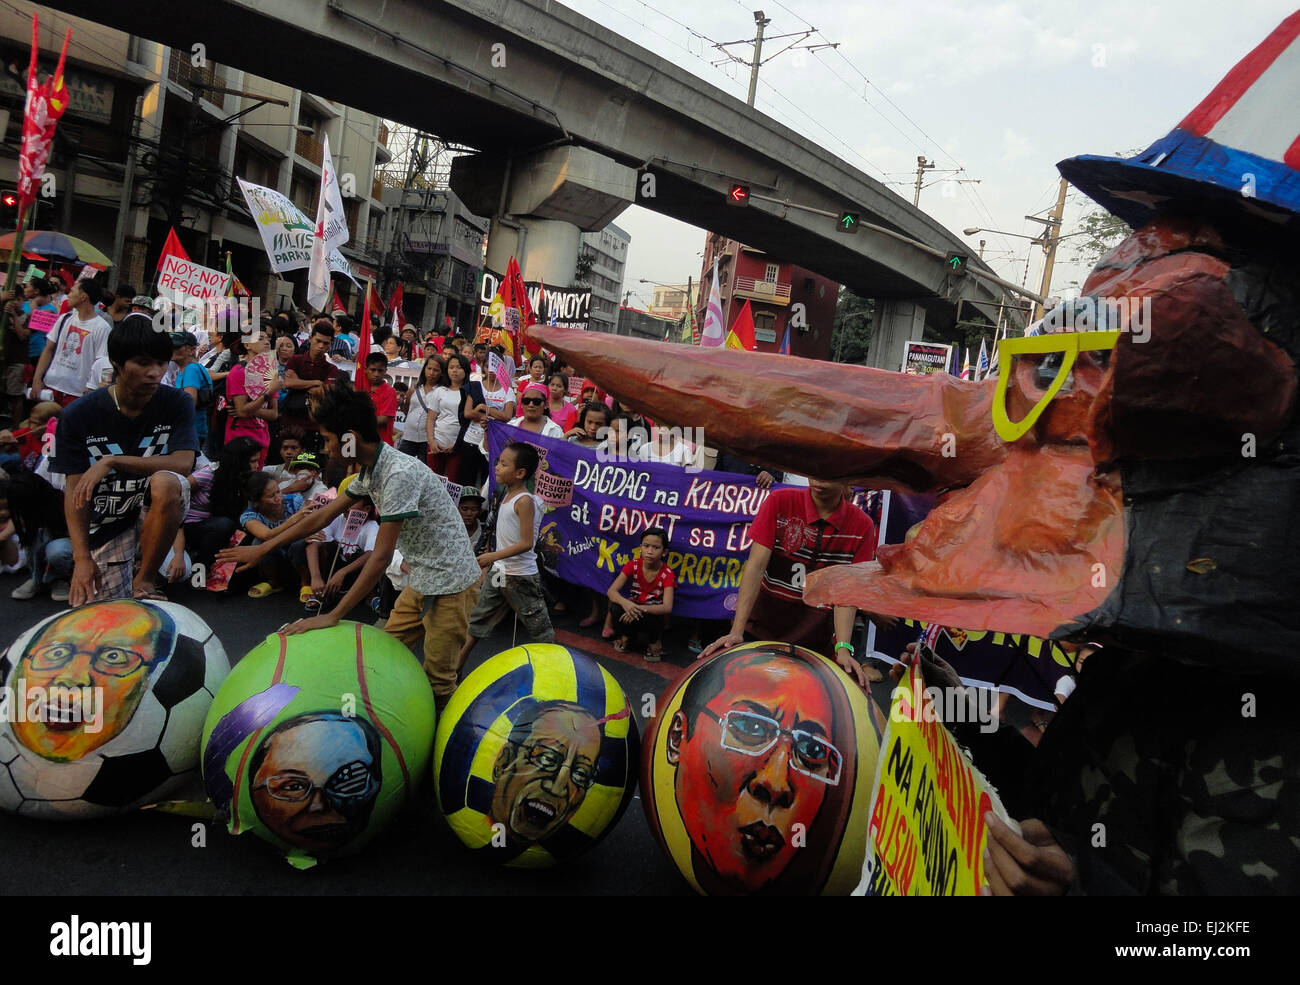 A Filipino activist wearing a mask depicting Philippine President Benigno Aquino III as 'Pinocchio' donning a US-styled top hat looks on as fellow activists arrange balls containing different facial gestures of the Philippine president, during a rally at Mendiola. President Aquino is facing calls for his removal over the botched anti-terror operation last January 25 in Mamasapano, Maguindanao to hunt wanted Malaysian bombmaker Zulkifri bin Hir, alias Marwan, that resulted in the deaths of 44 police commandos. (Photo by Richard James Mendoza/Pacific Press) Stock Photo